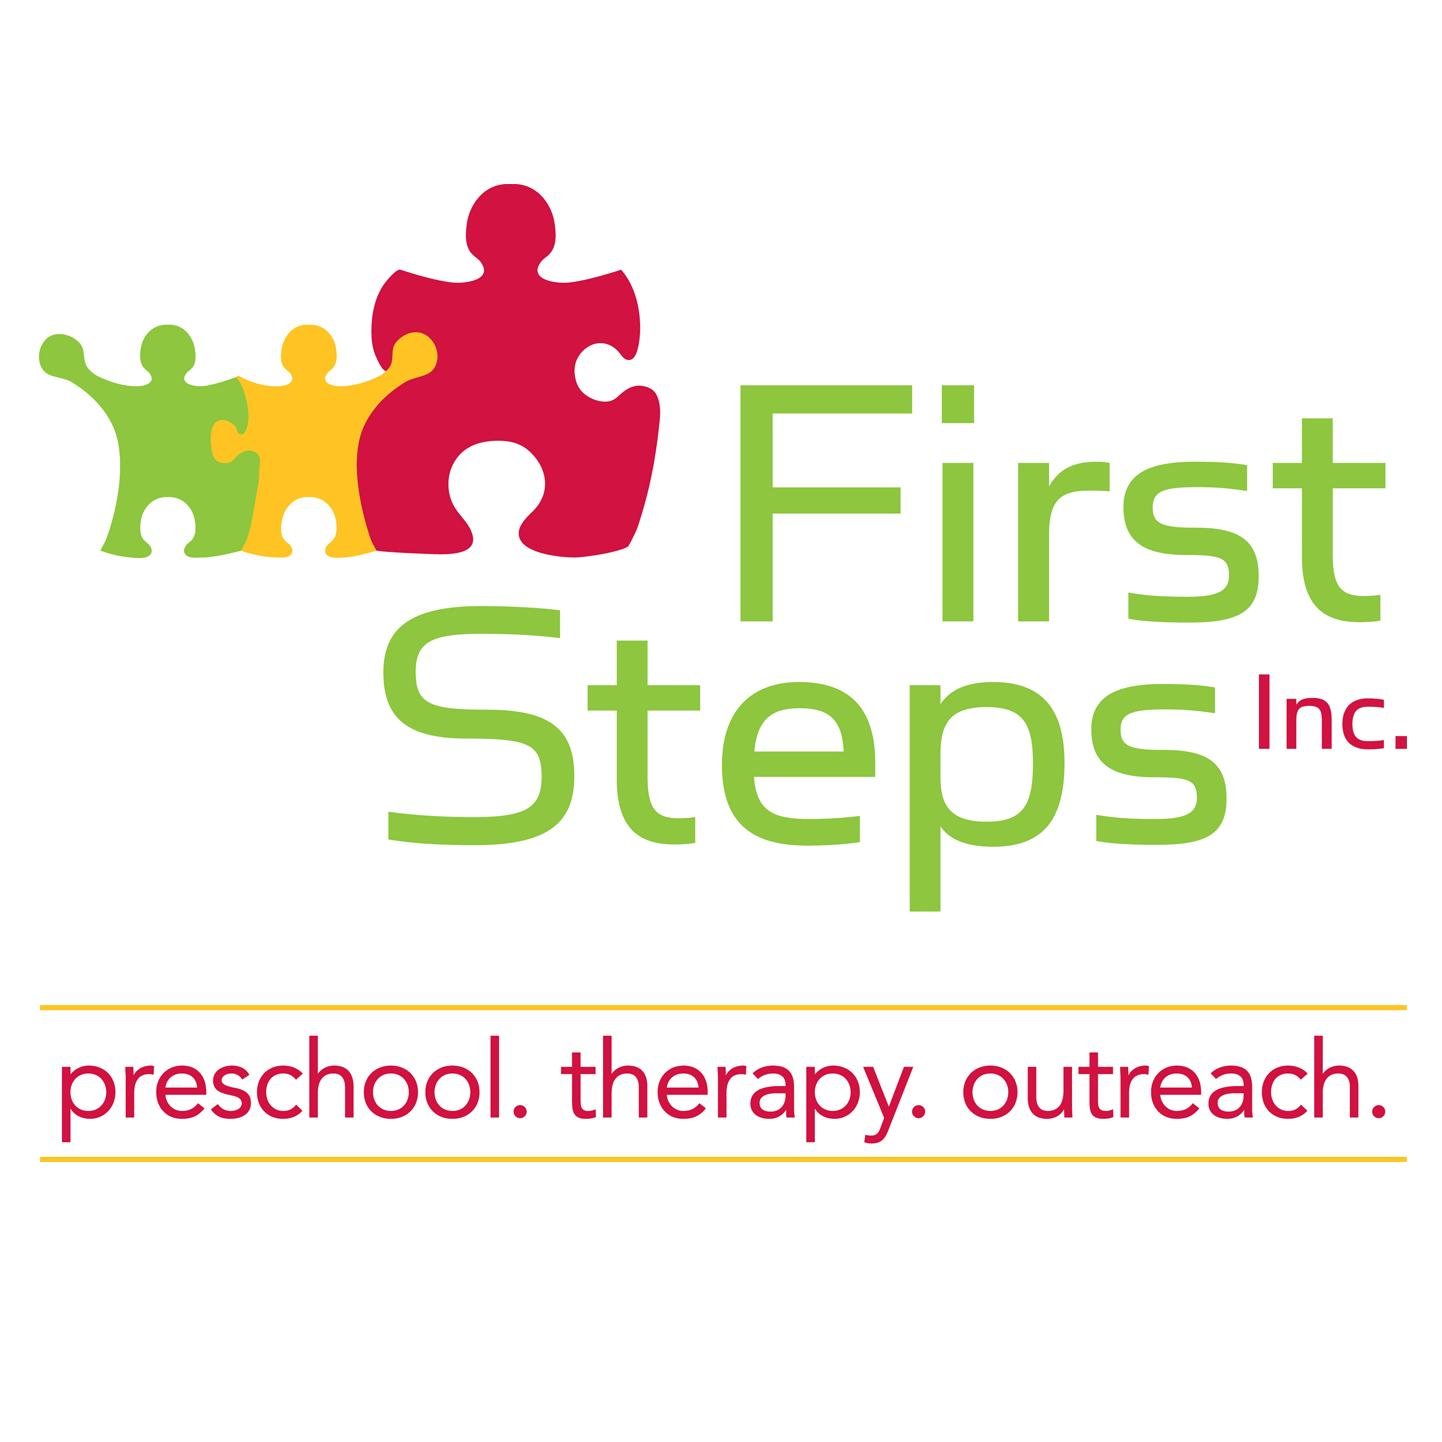 First Steps has a 60-year history of serving children with special needs and typically developing children in Middle TN. Preschool, Therapy & Outreach services